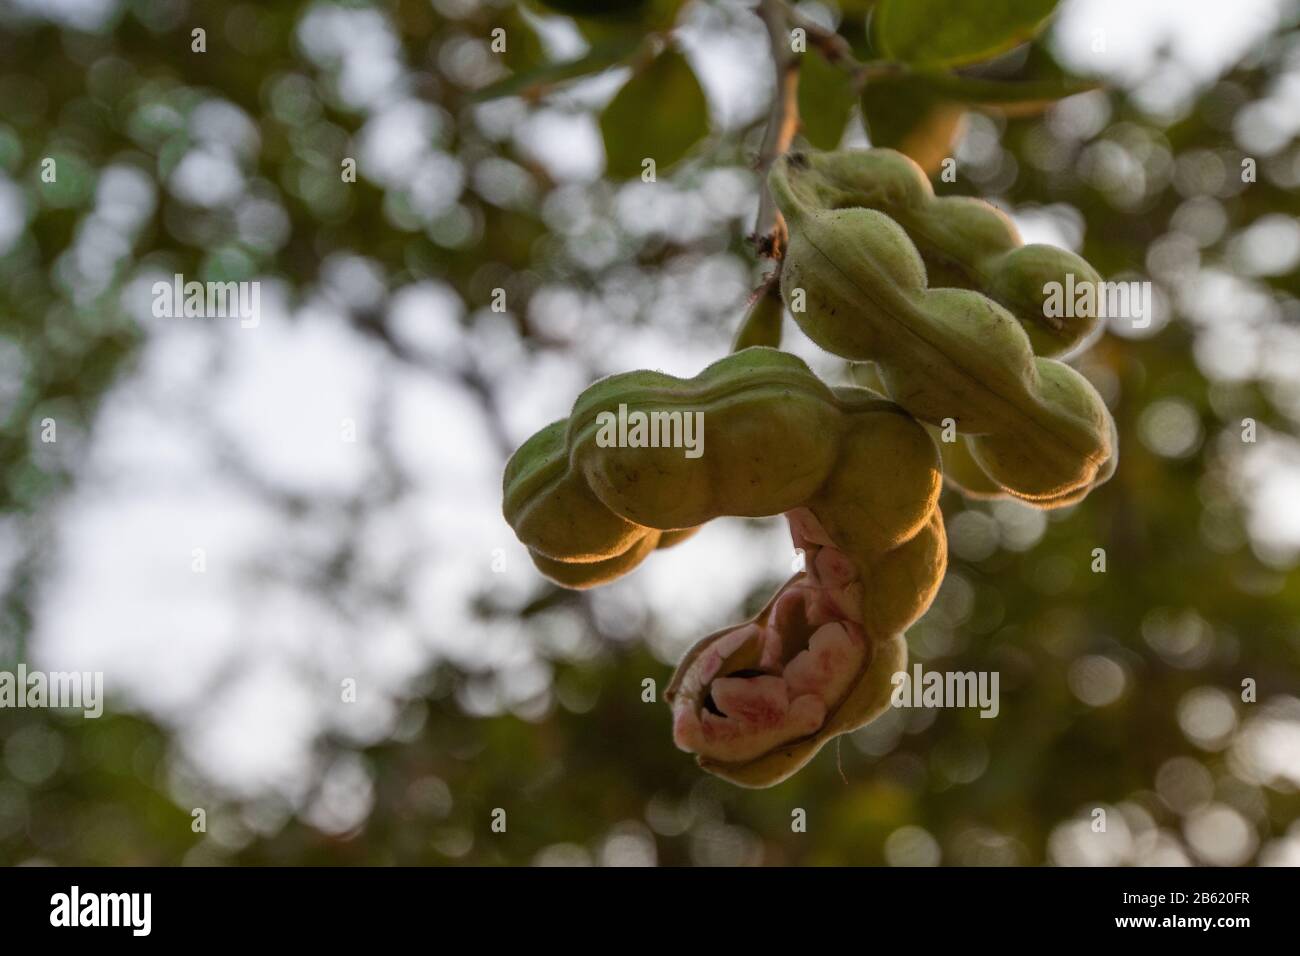 March 1, 2020, Ratchaburi, Thailand: A view of ripe Pithecellobium dulce fruits on a tree..The harvest of the Pithecellobium dulce also known as Madras Thorn is from December to March. (Credit Image: © Vachira Kalong/SOPA Images via ZUMA Wire) Stock Photo